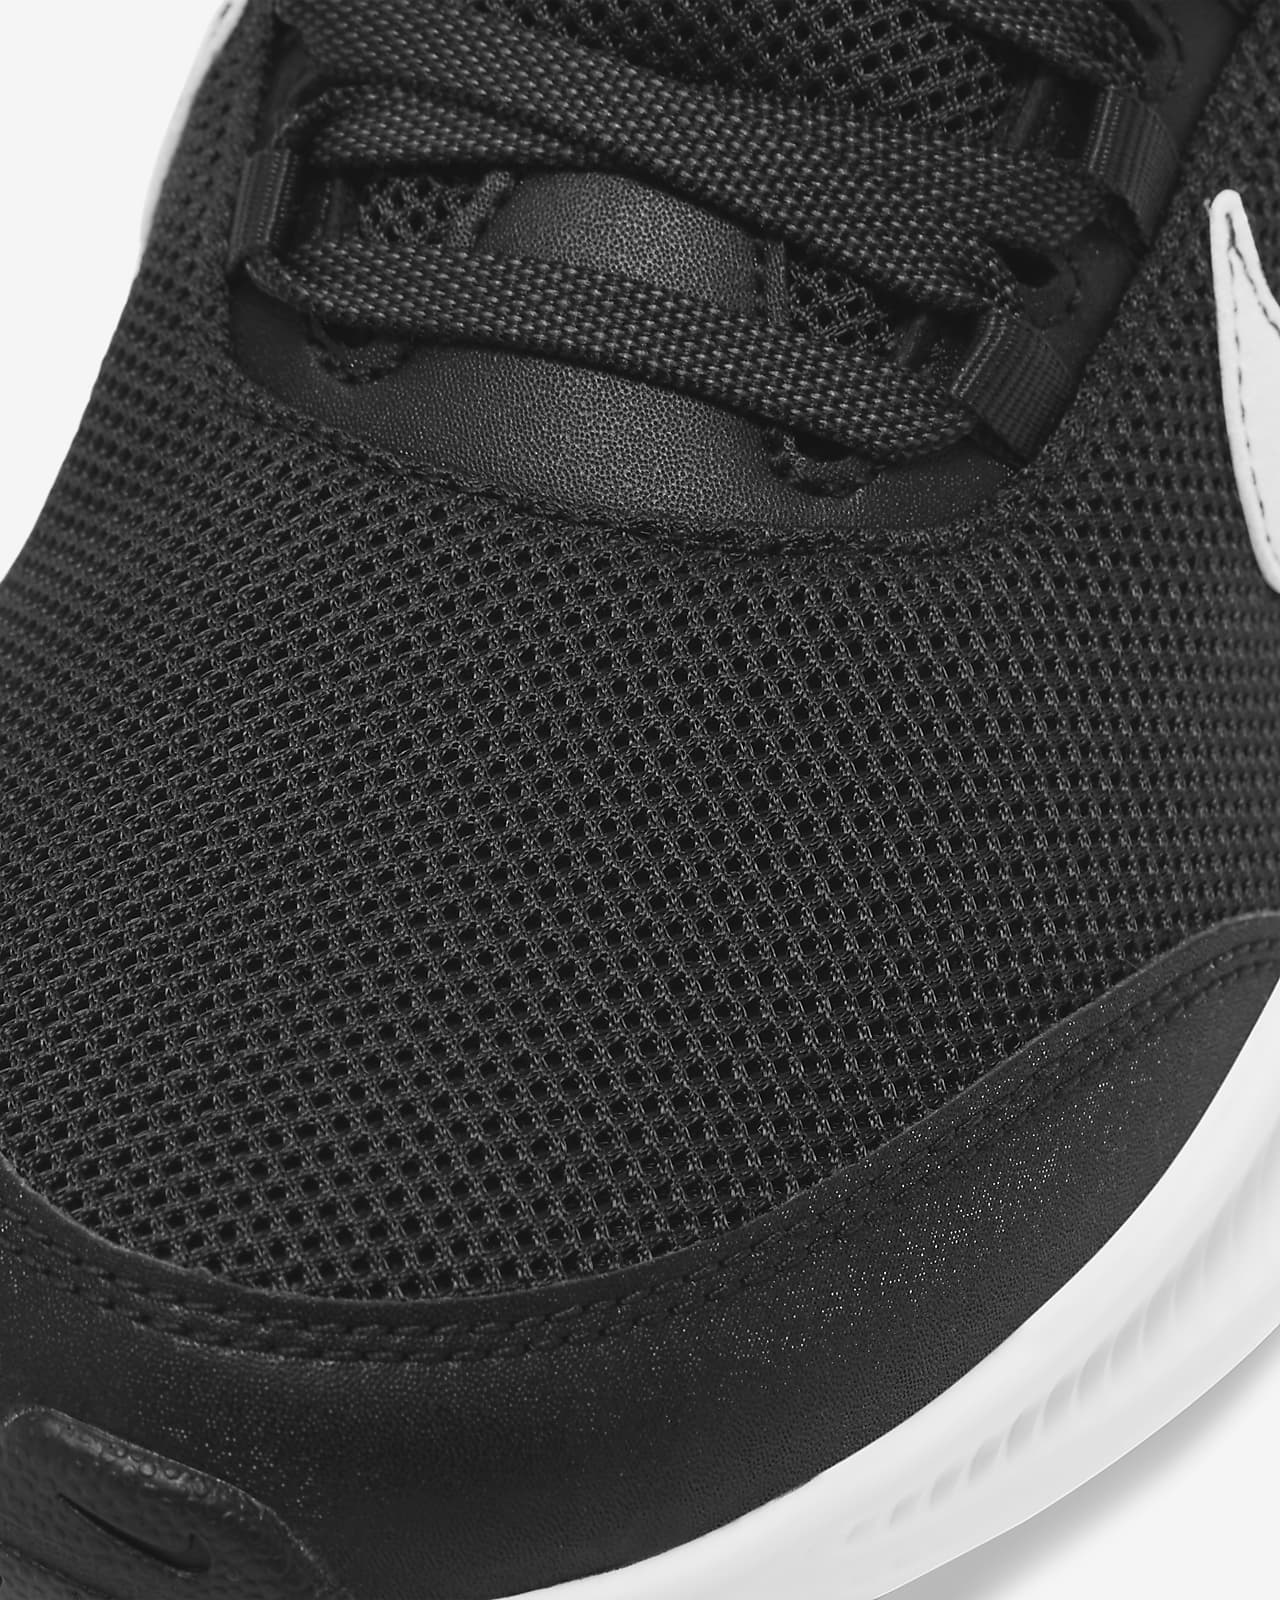 black and gray nike running shoes